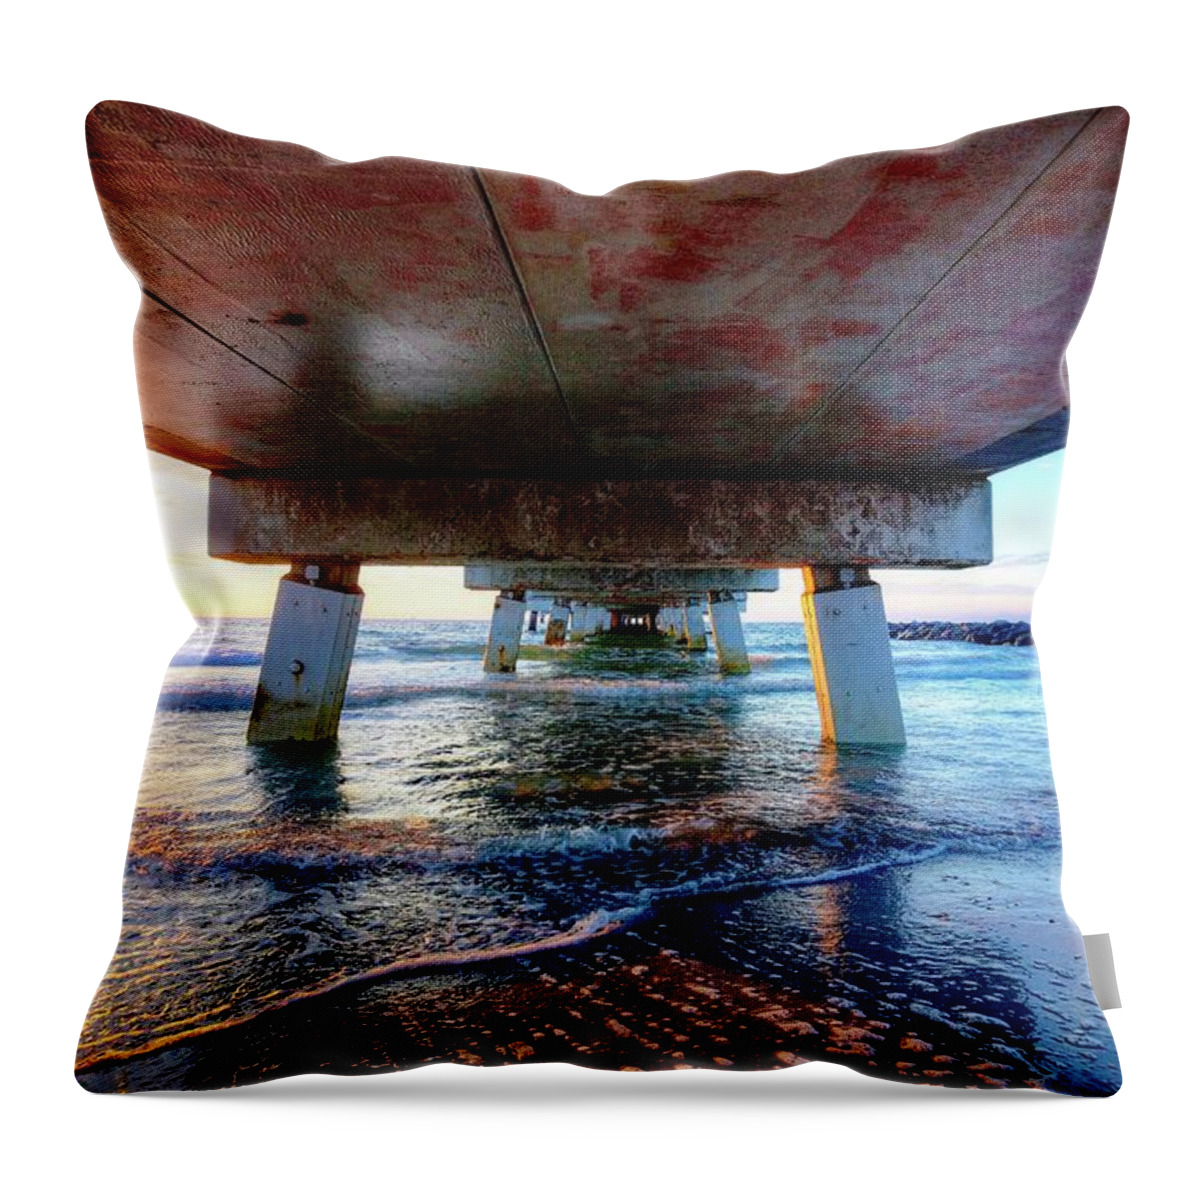 Sunset Throw Pillow featuring the photograph Bridge at Sunset by Judy Rogero